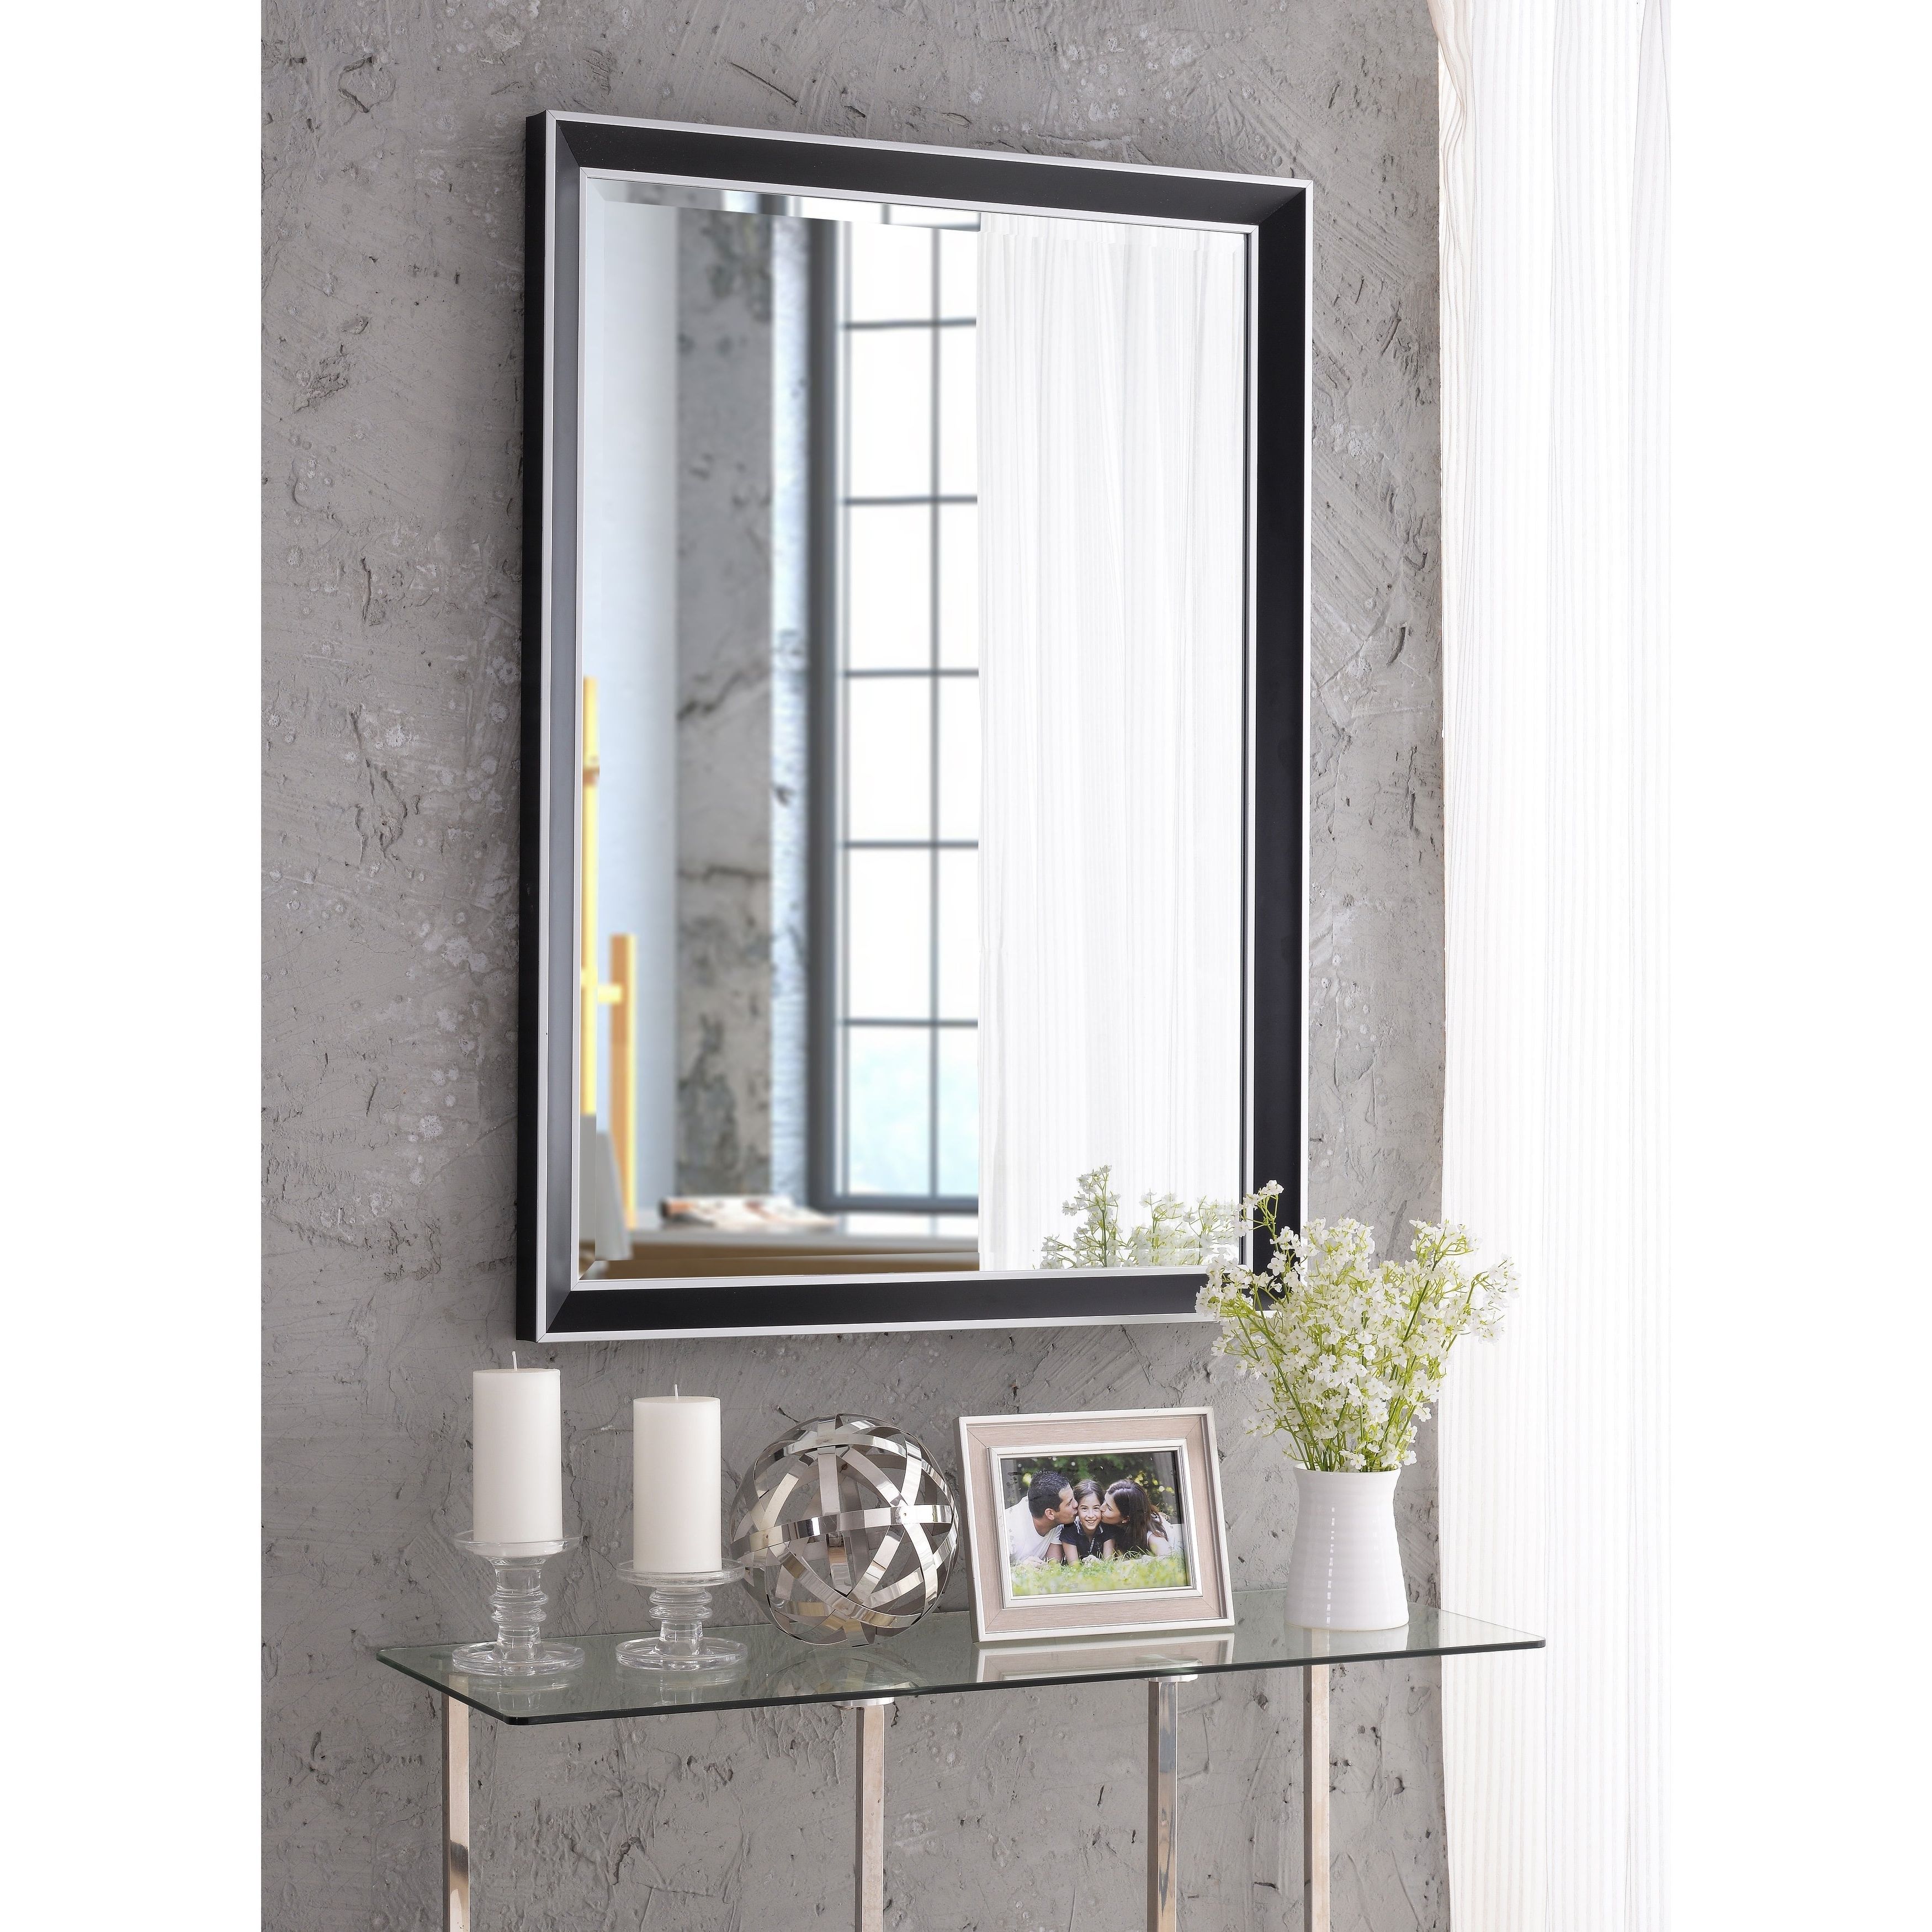 2019 Tanner Accent Mirrors Throughout Tanner 42" Wall Mirror – Black With Polished Silver (View 6 of 20)